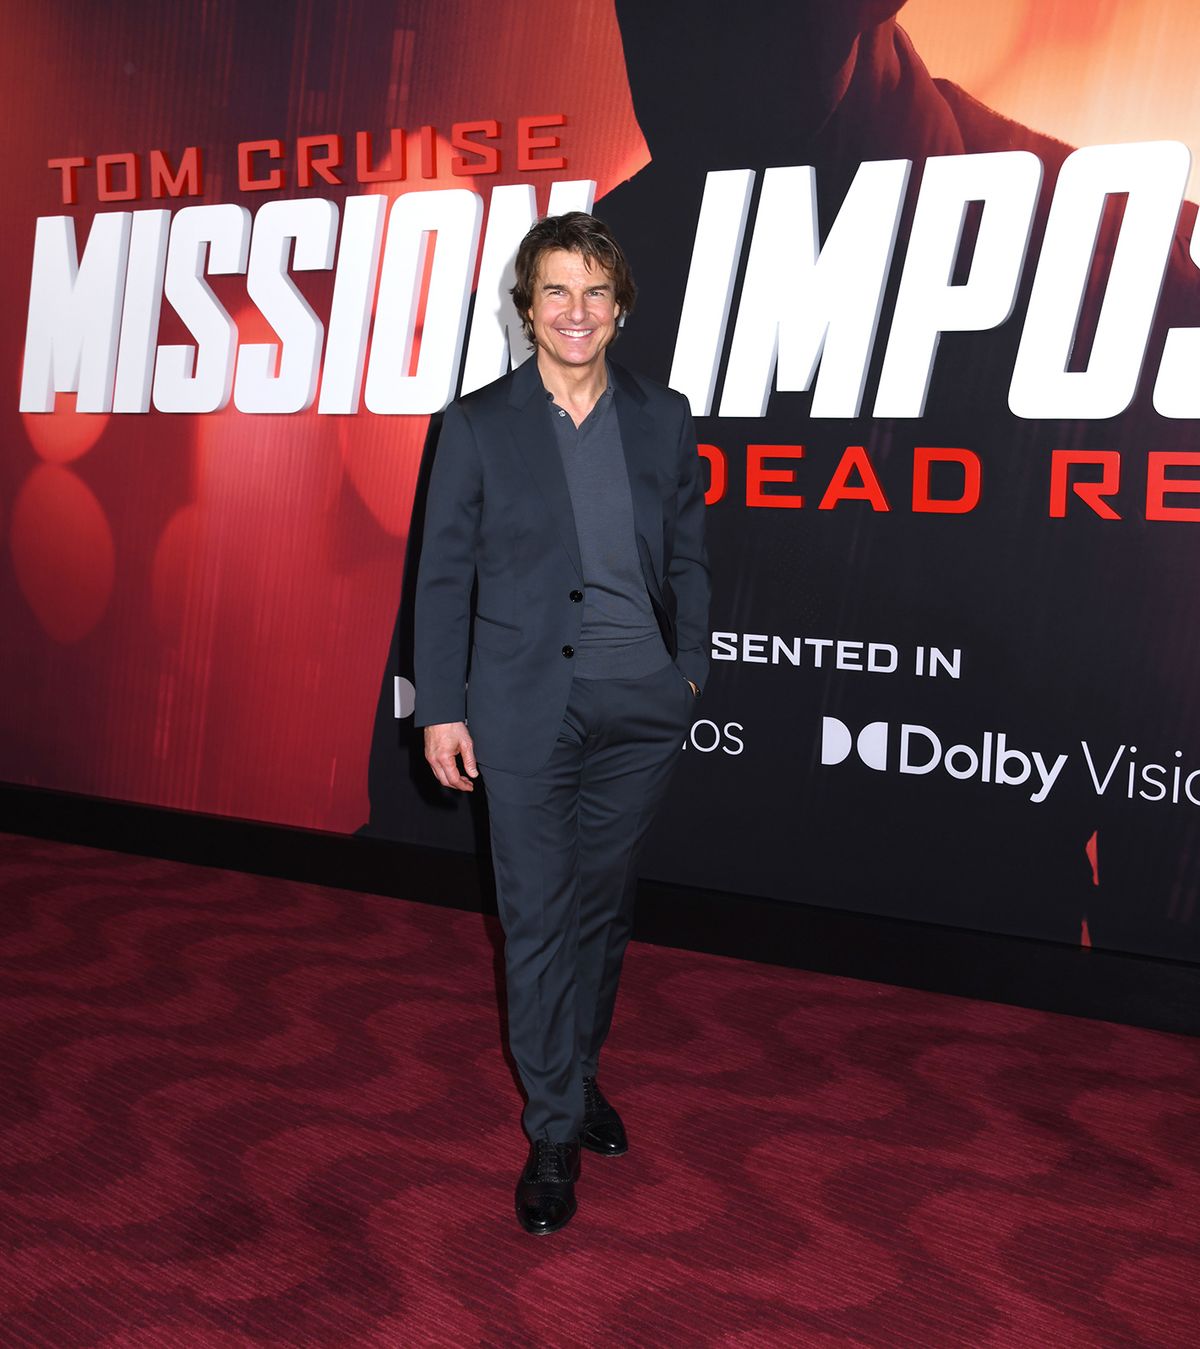 'Mission: Impossible - Dead Reckoning Part One' US PremiereJuly 10, 2023, New York, New York, USA: Tom Cruise attends the US Premiere of 'Mission: Impossible - Dead Reckoning Part One' at Rose Theater, at Jazz at Lincoln CenterÕs Frederick P. Rose Hall in New York. „Mission Impossible - Dead Reckoning Part One” New York Premiere July 10, 2023